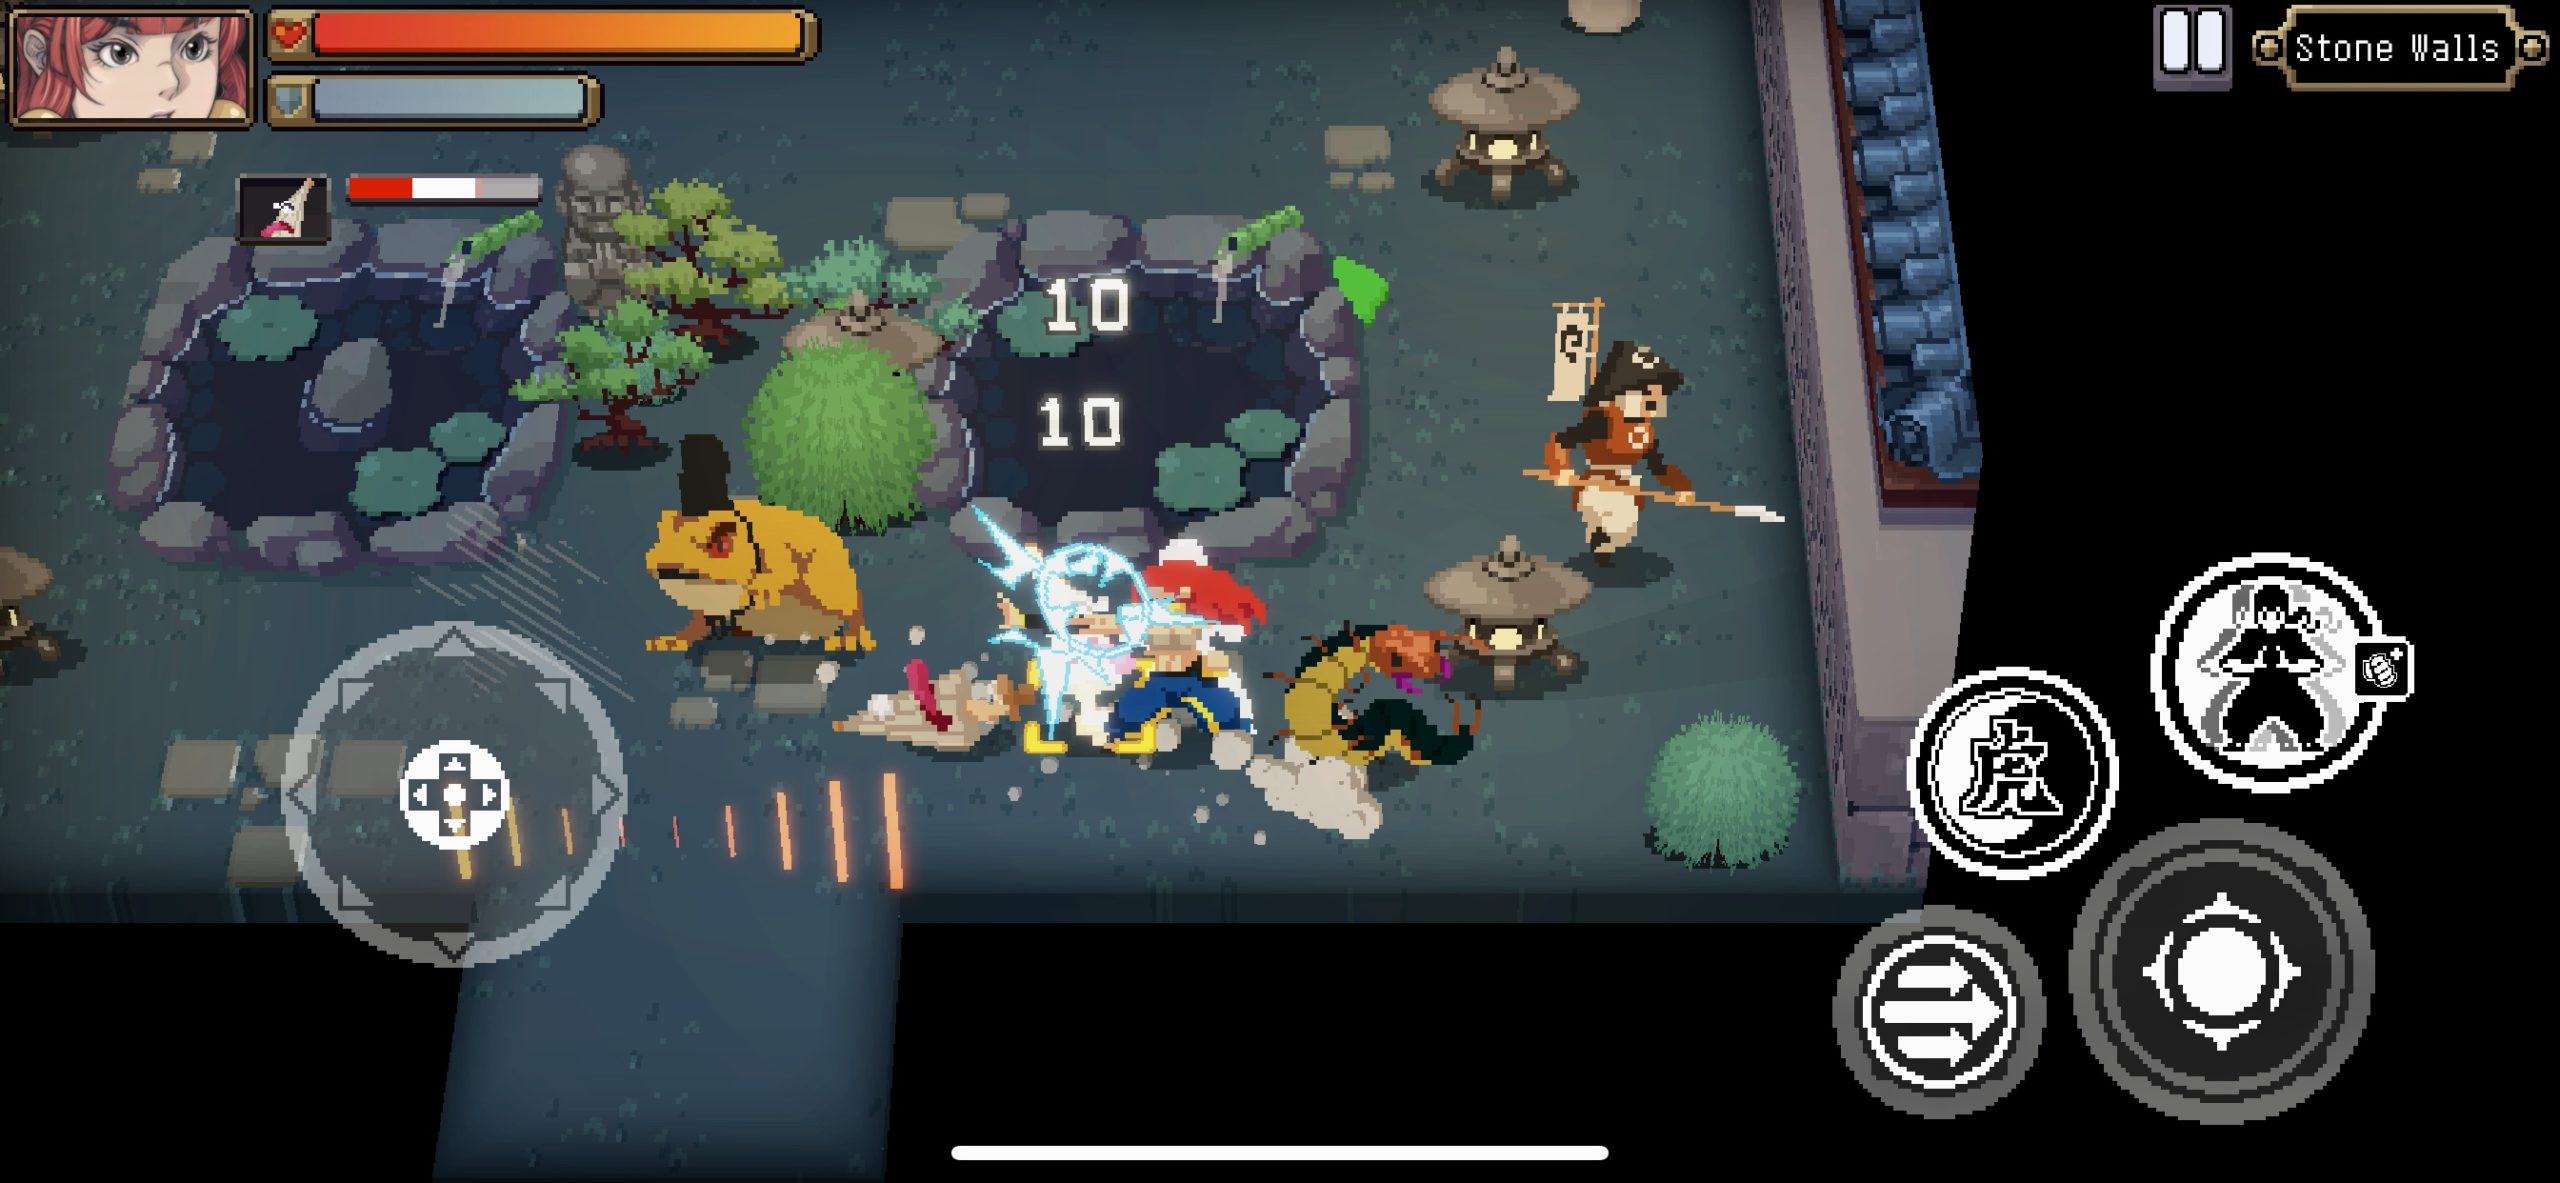 Otherworld Legends Review – Mobile Hack and Slash Done Pretty Well